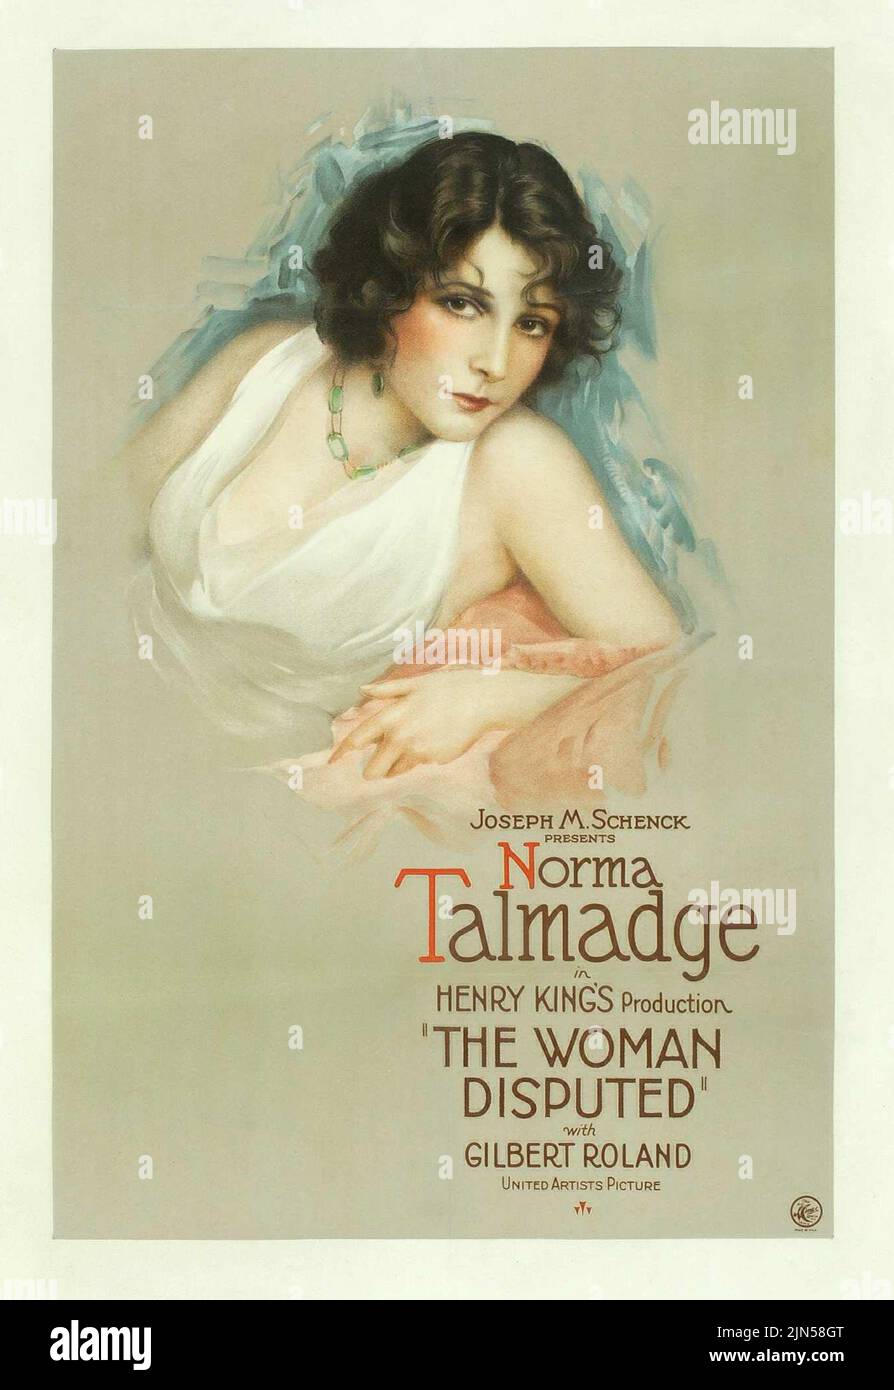 Woman Disputed, The (United Artists, 1928) feat Norma Talmadge Stock Photo